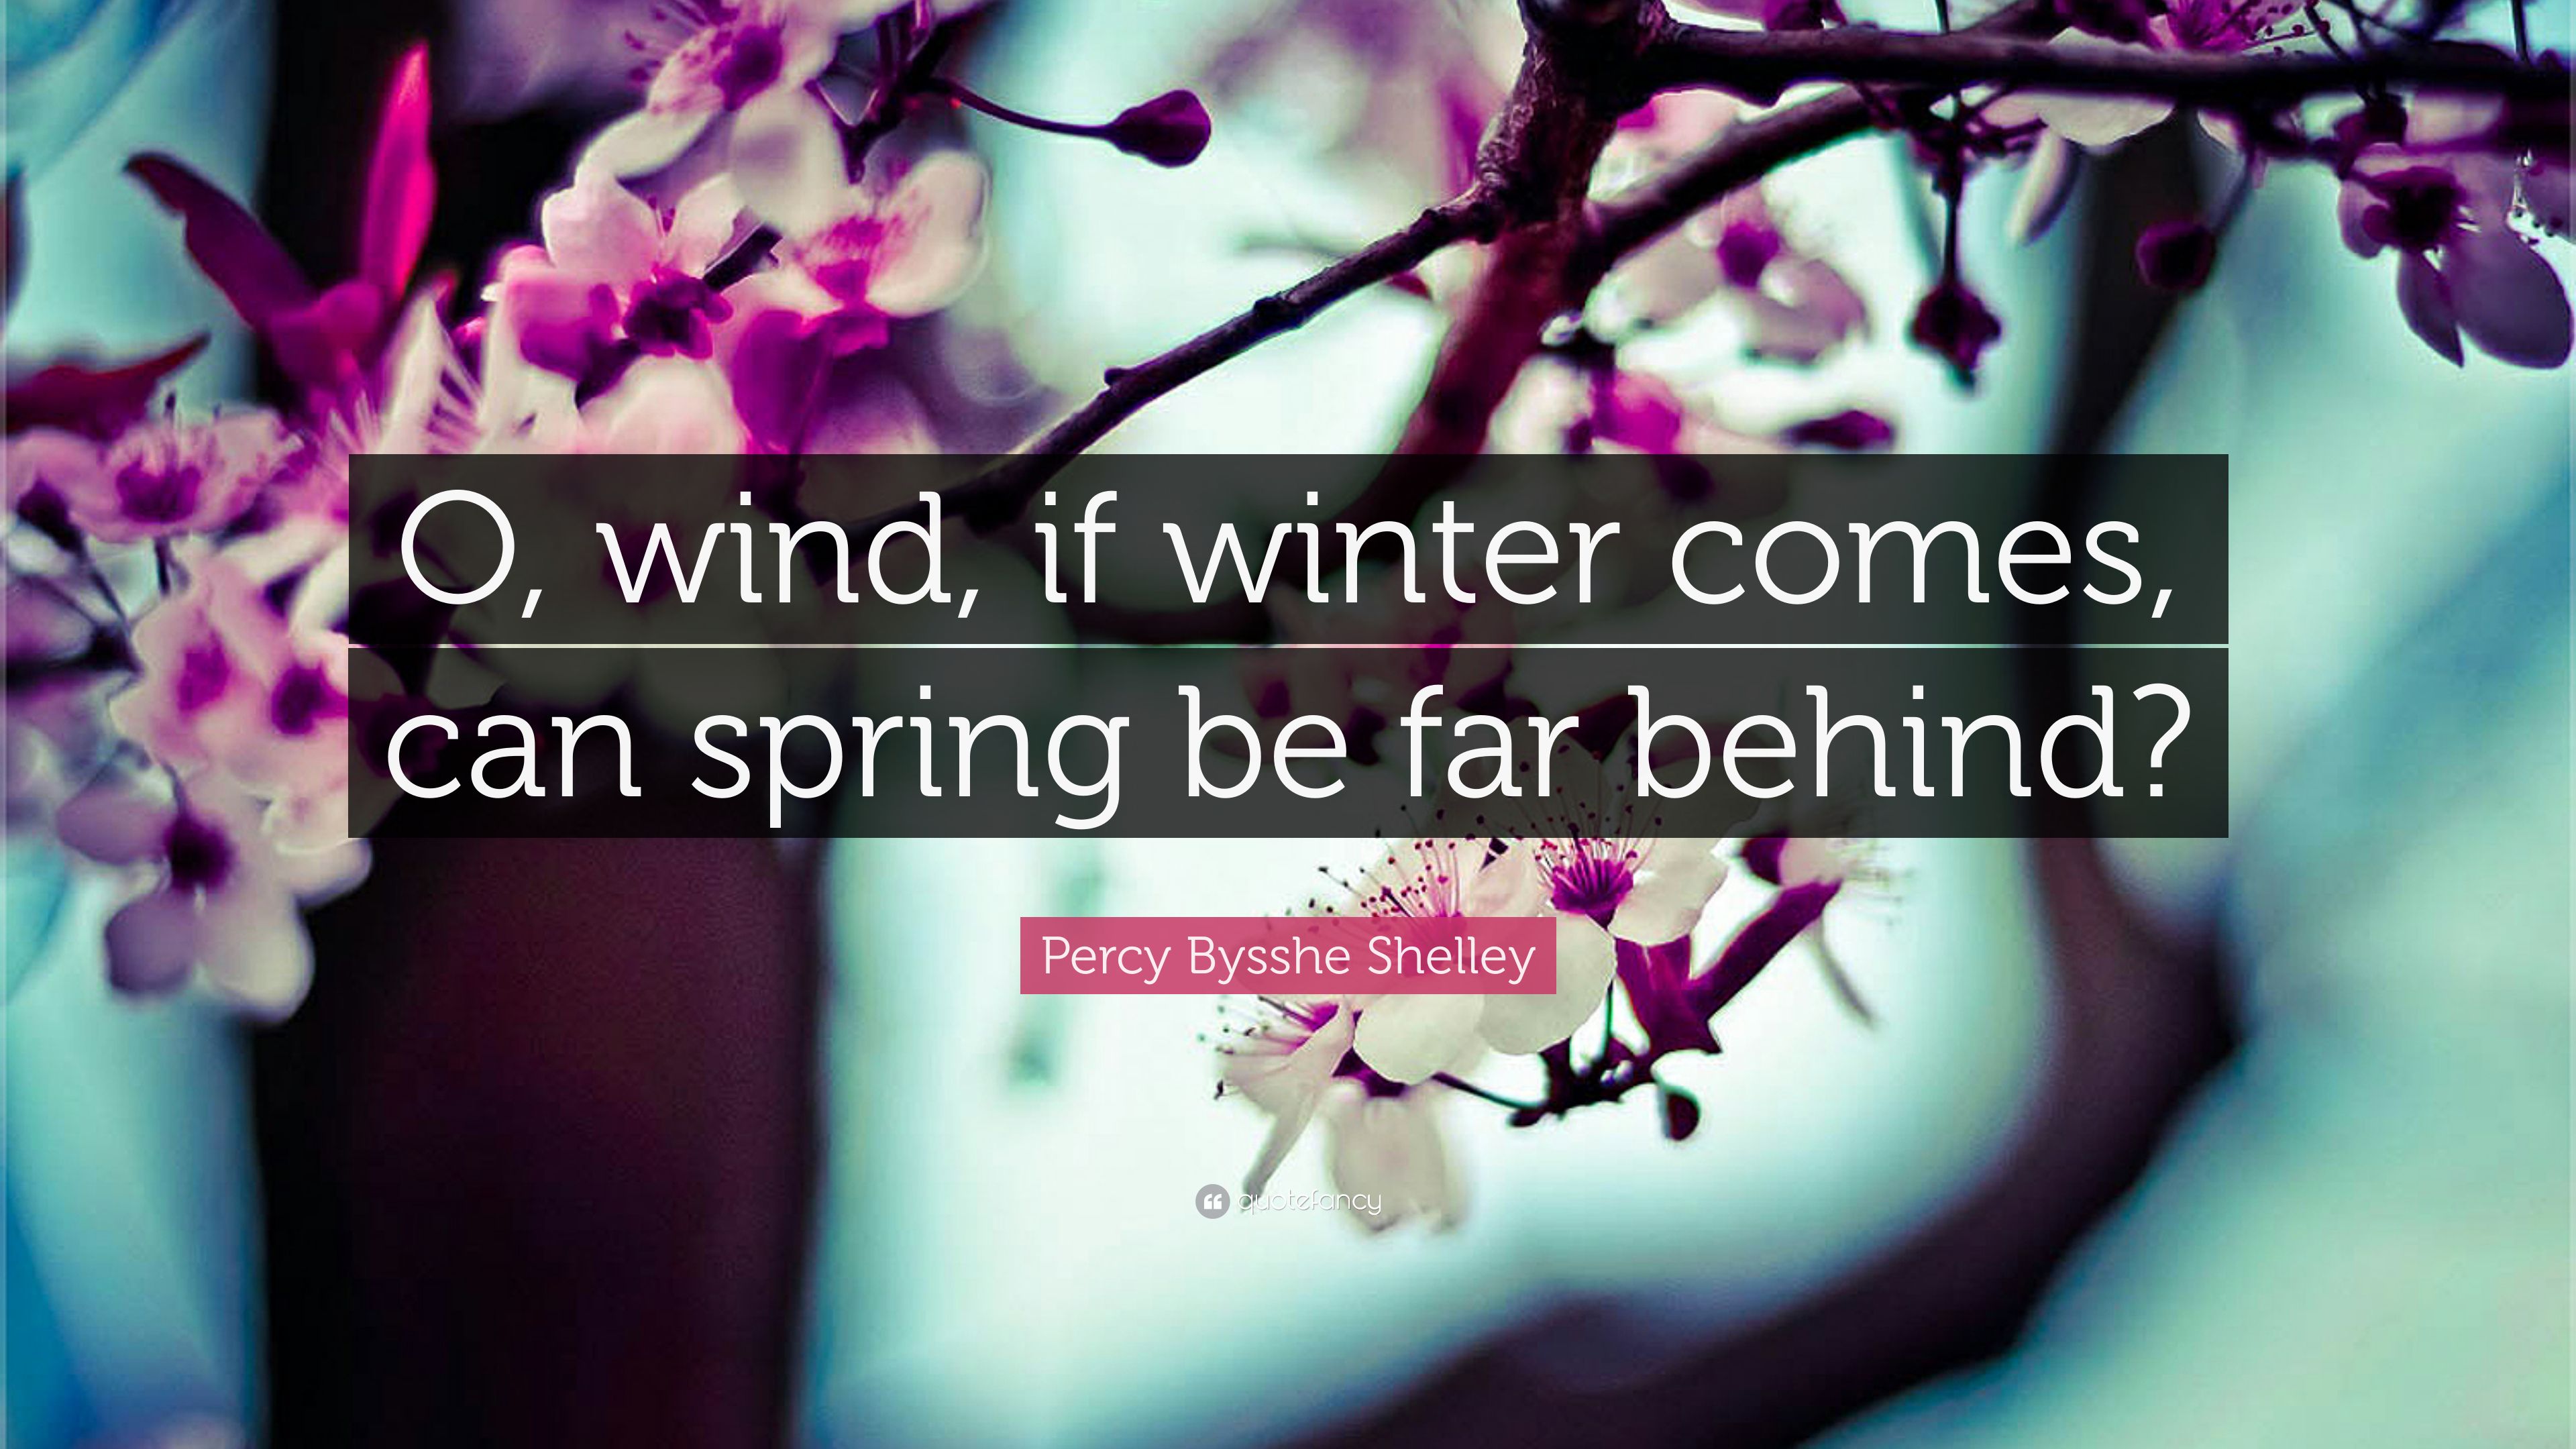 Percy Bysshe Shelley Quote: “O, wind, if winter comes, can spring